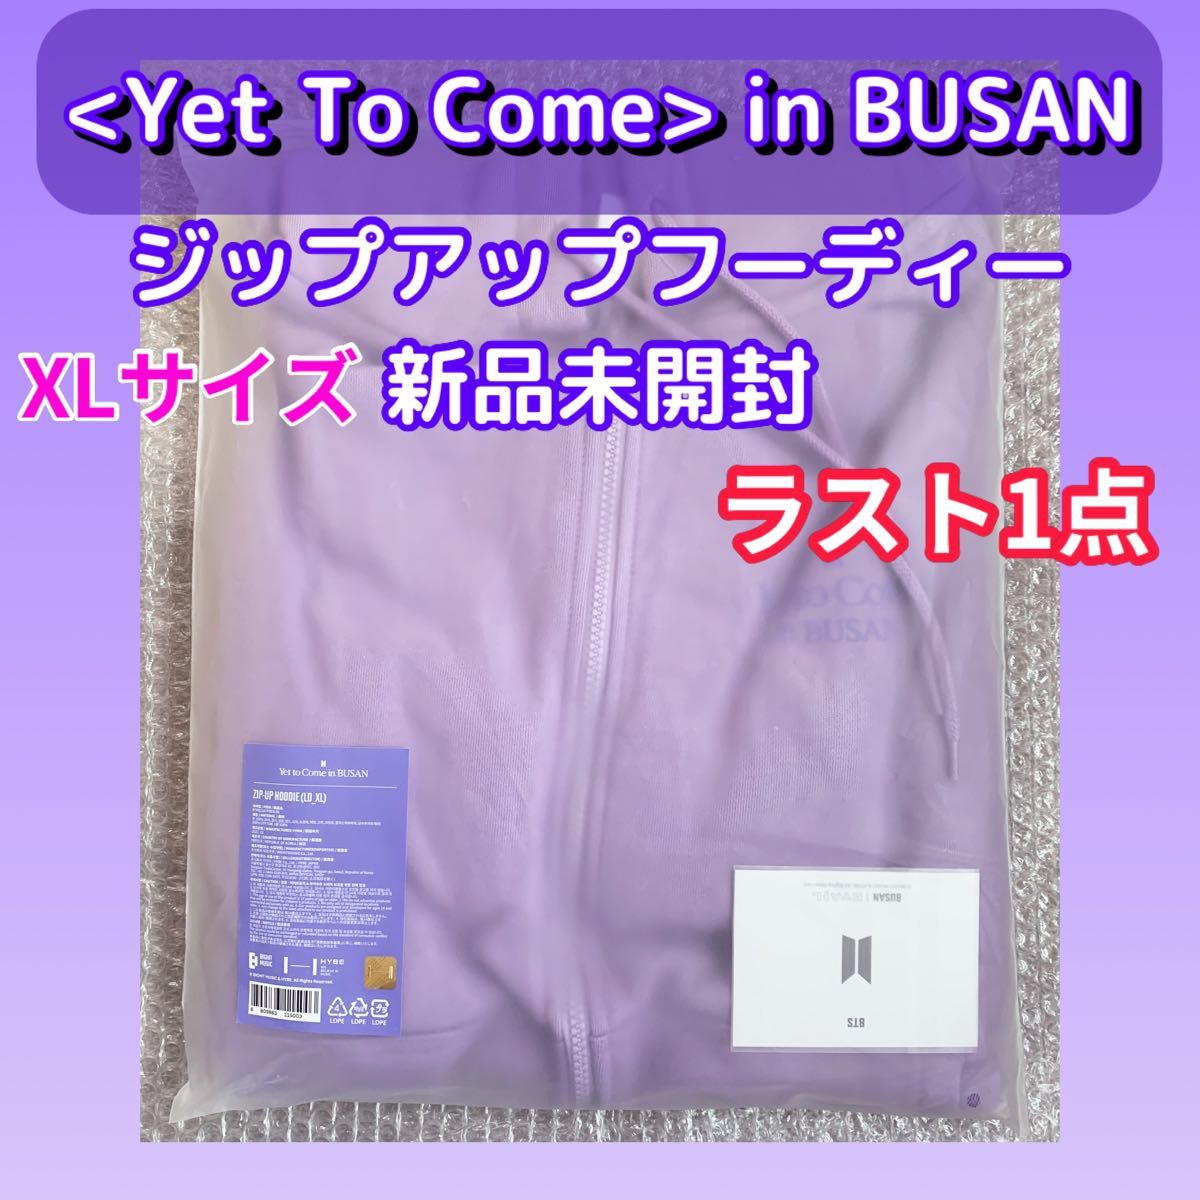 BTS 釜山コン　Yet To Come パーカー　フーディー　XL